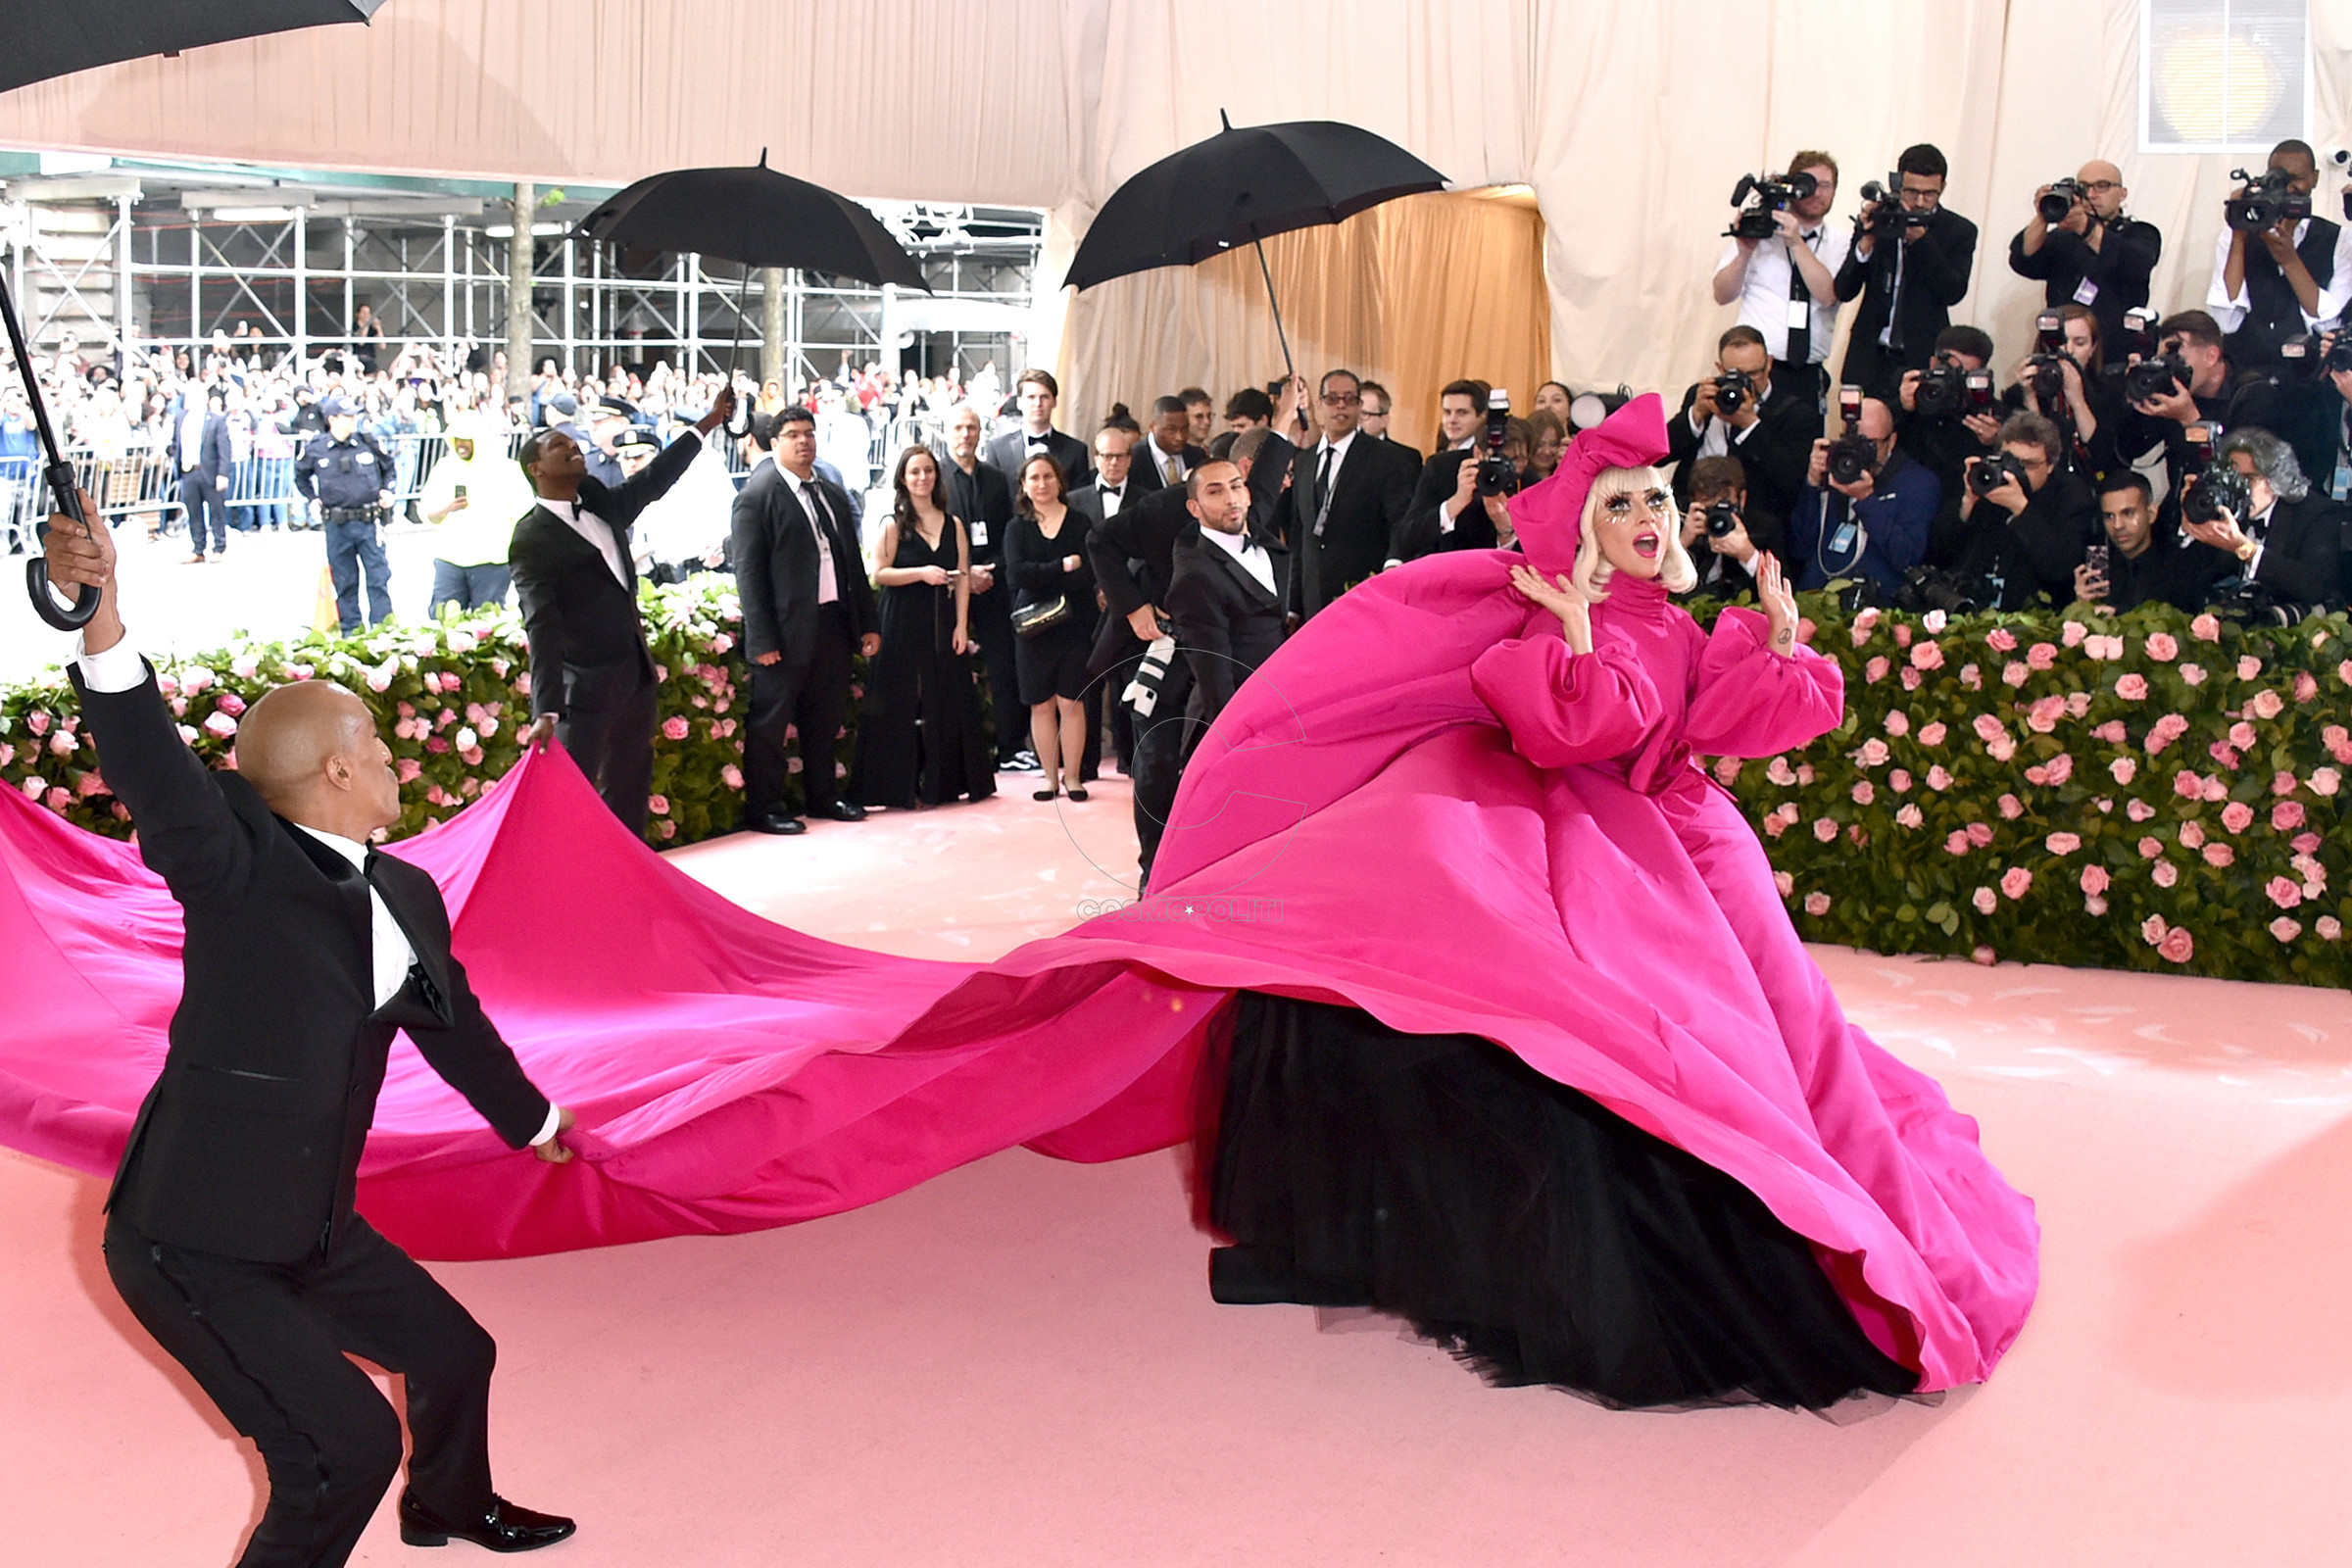 NEW YORK, NY - MAY 06:  Lady Gaga arrives at the 2019 Met Gala Celebrating Camp: Notes On Fashion at The Metropolitan Museum of Art on May 6, 2019 in New York City.  (Photo by John Shearer/Getty Images for THR)